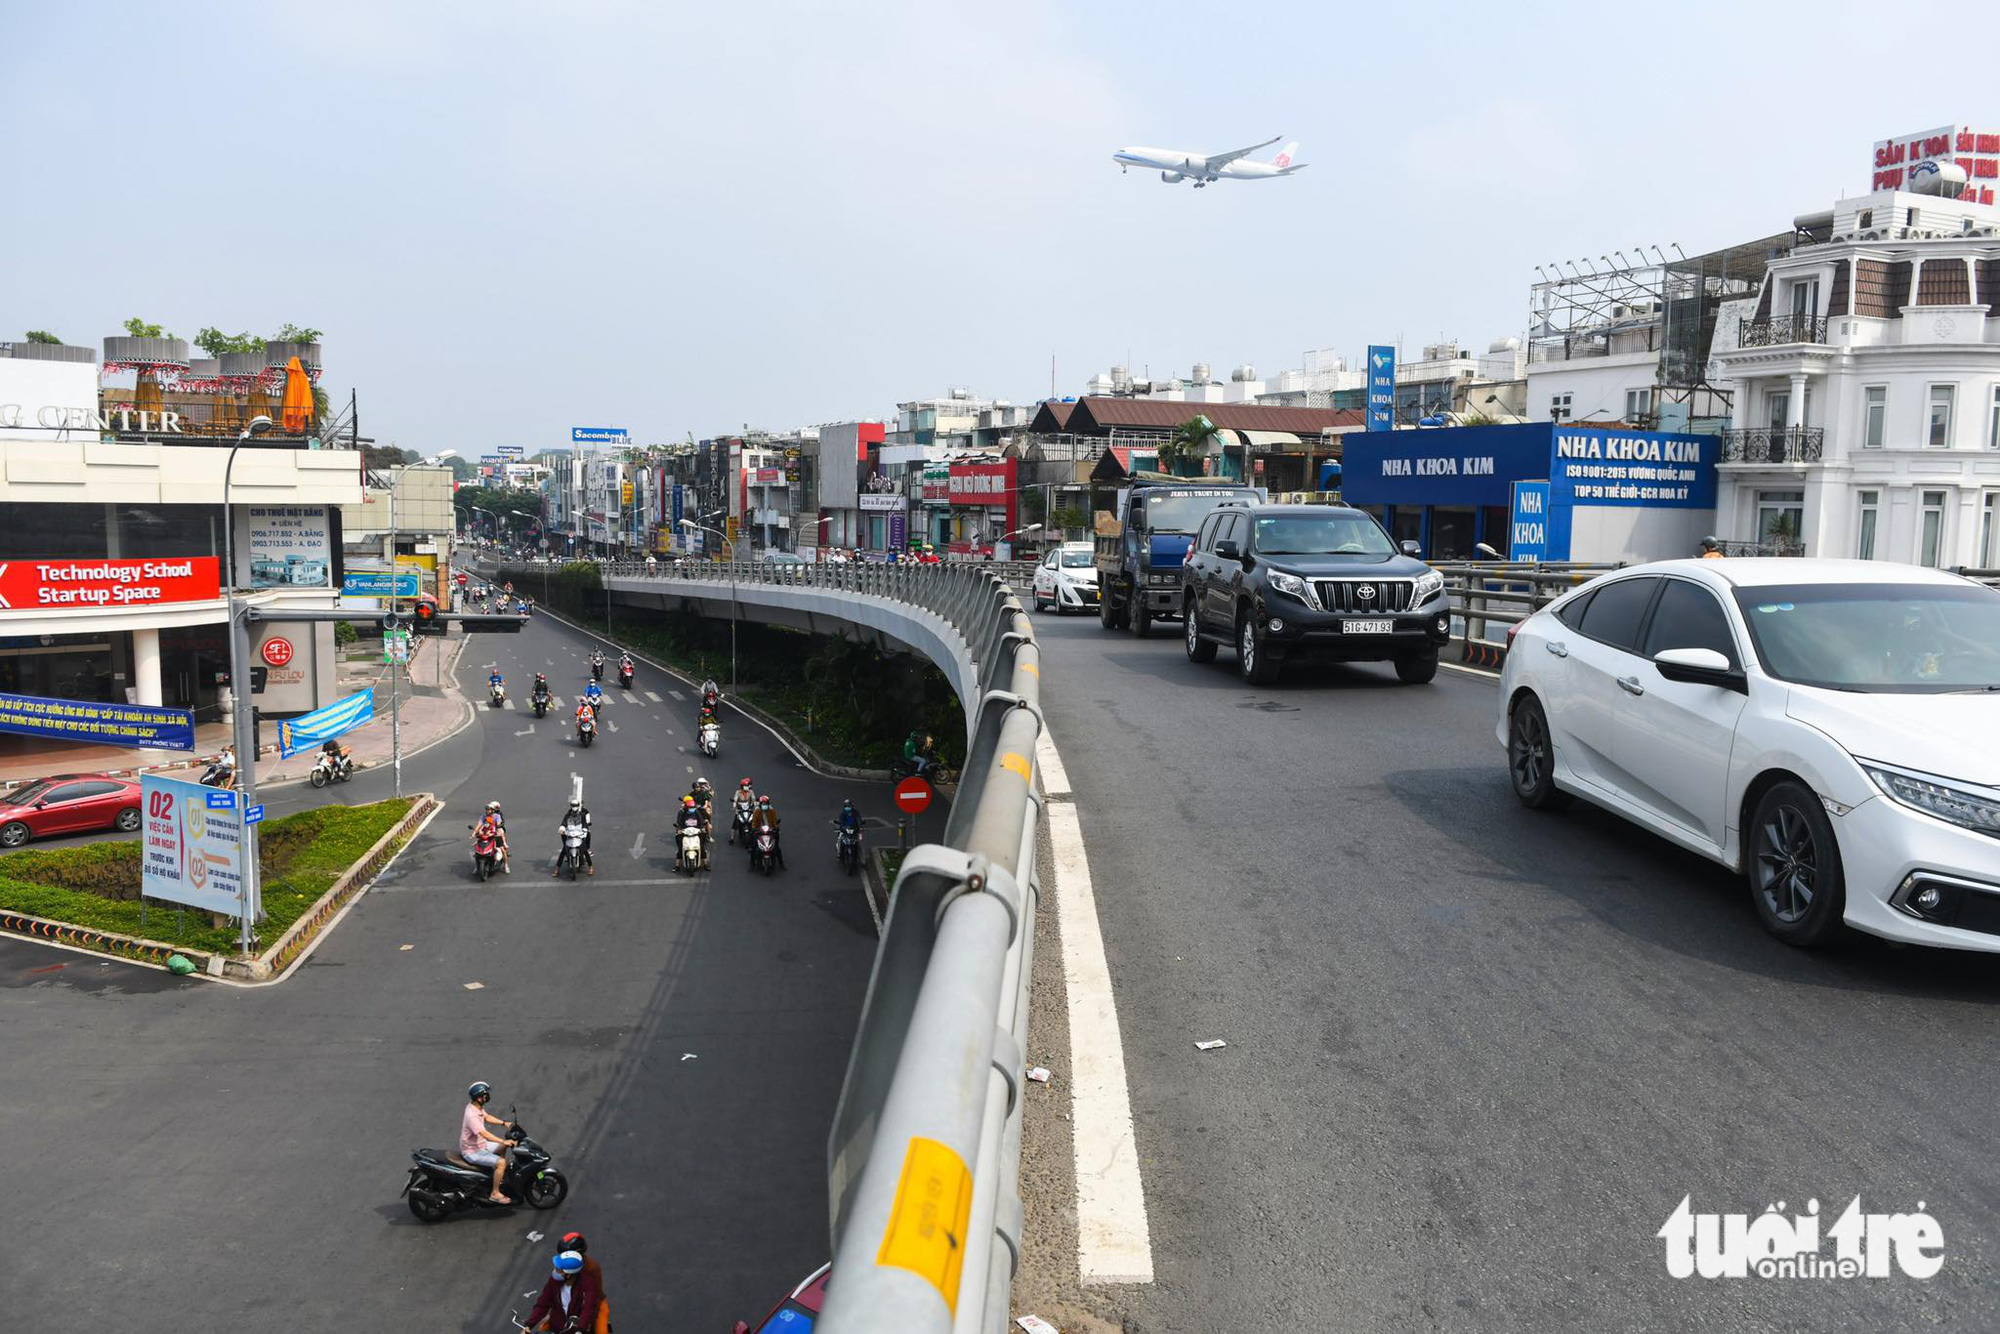 In 2017, the Ho Chi Minh City authorities scaled down the roundabout and built a steel overpass there, helping ease traffic jams.